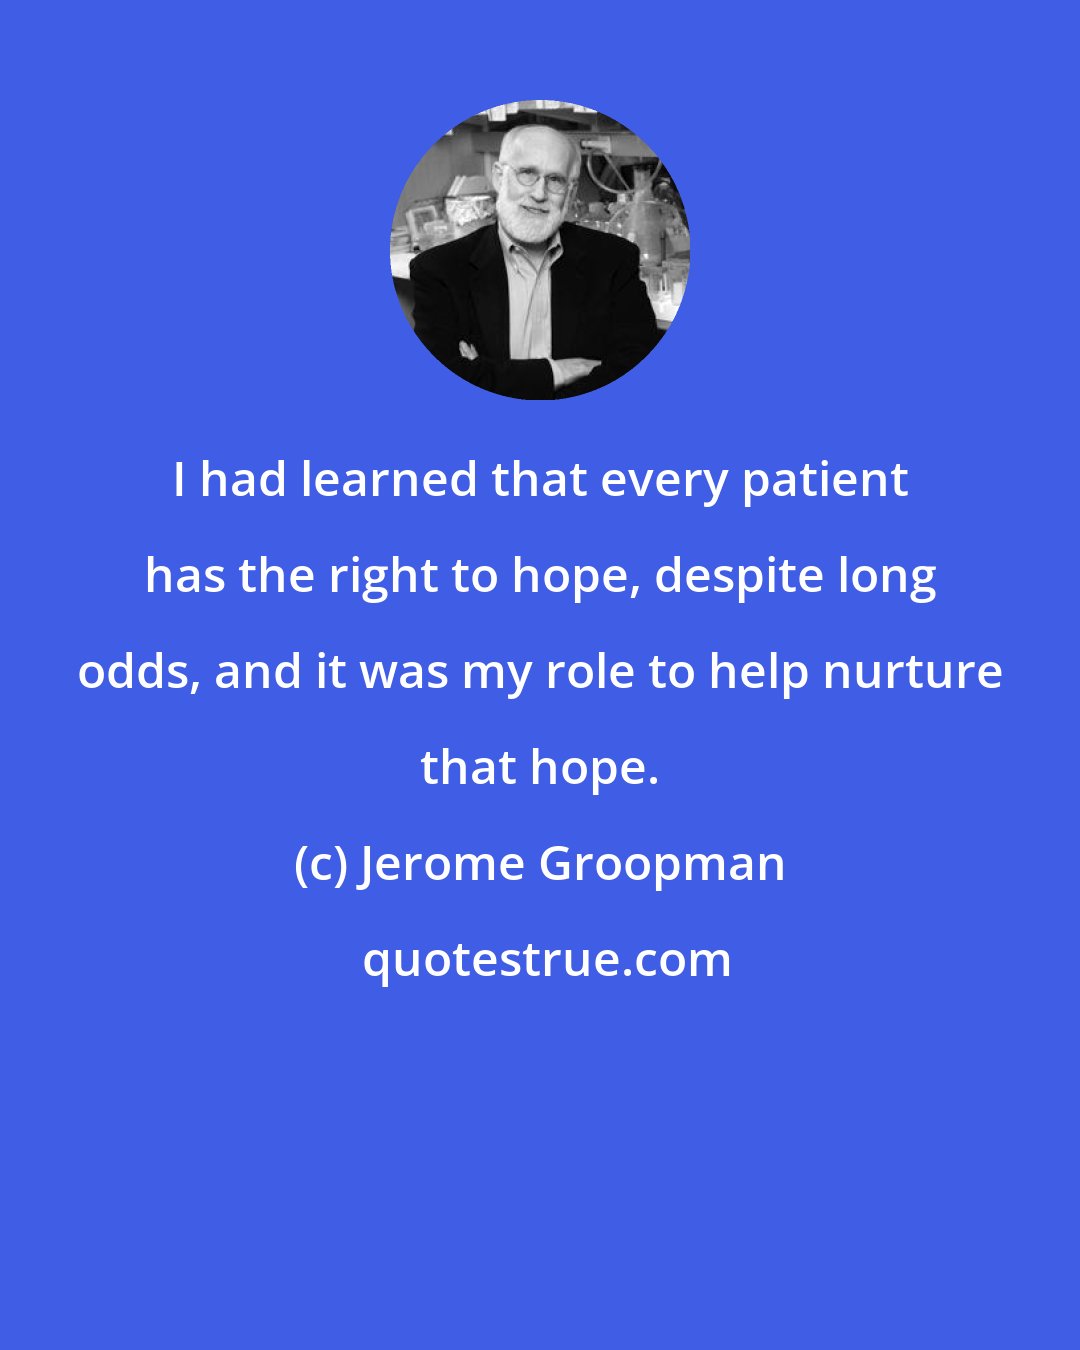 Jerome Groopman: I had learned that every patient has the right to hope, despite long odds, and it was my role to help nurture that hope.